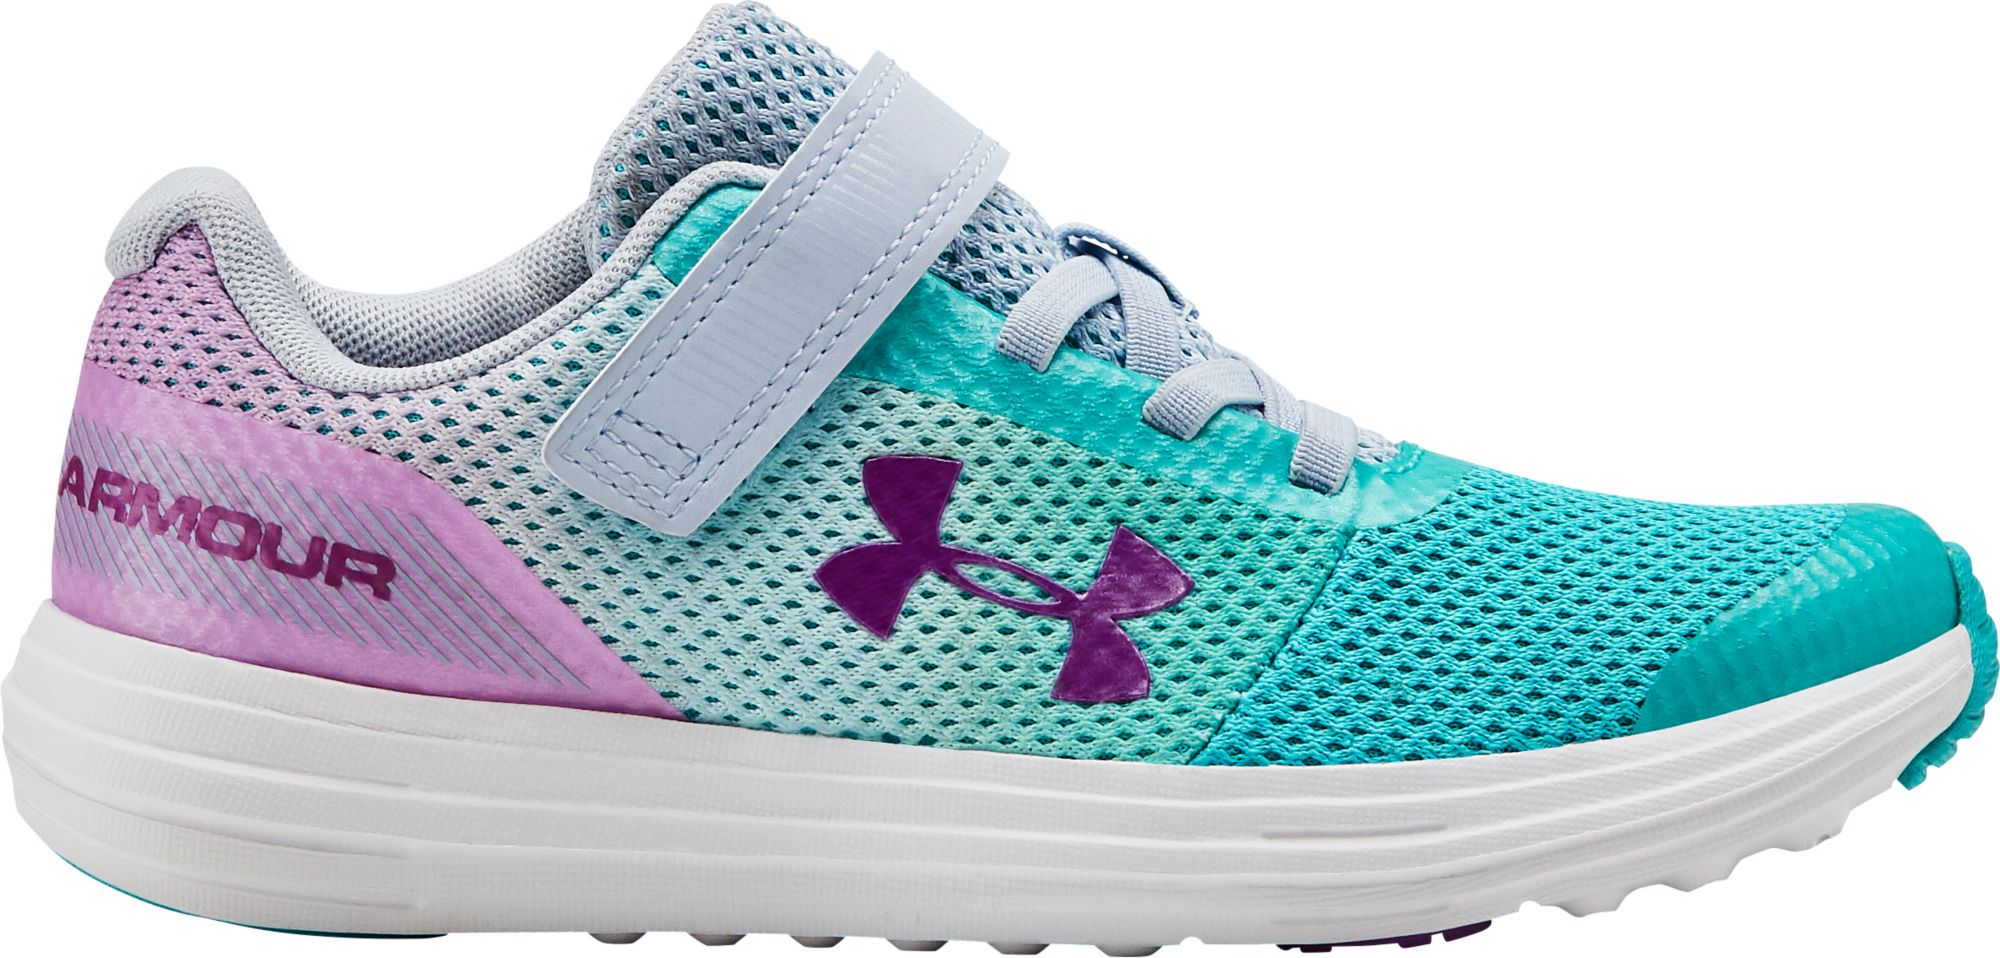 Under Armour Kids' Shoes | Best Price 